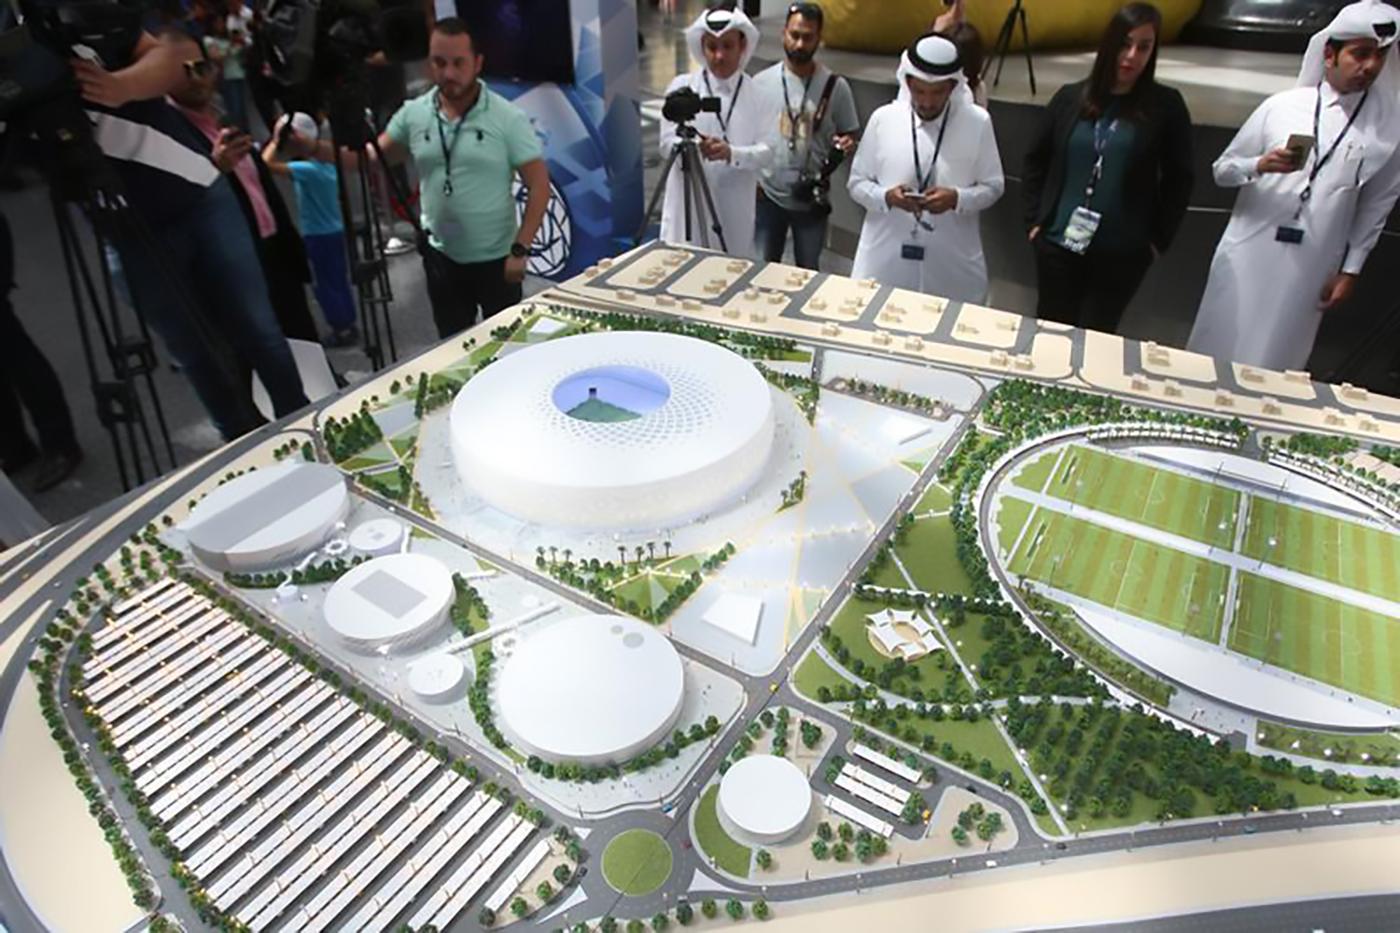 People look at a model of Al Thumama stadium during an unveiling ceremony at Hamad International Airport in Doha, Qatar, August 24, 2017.